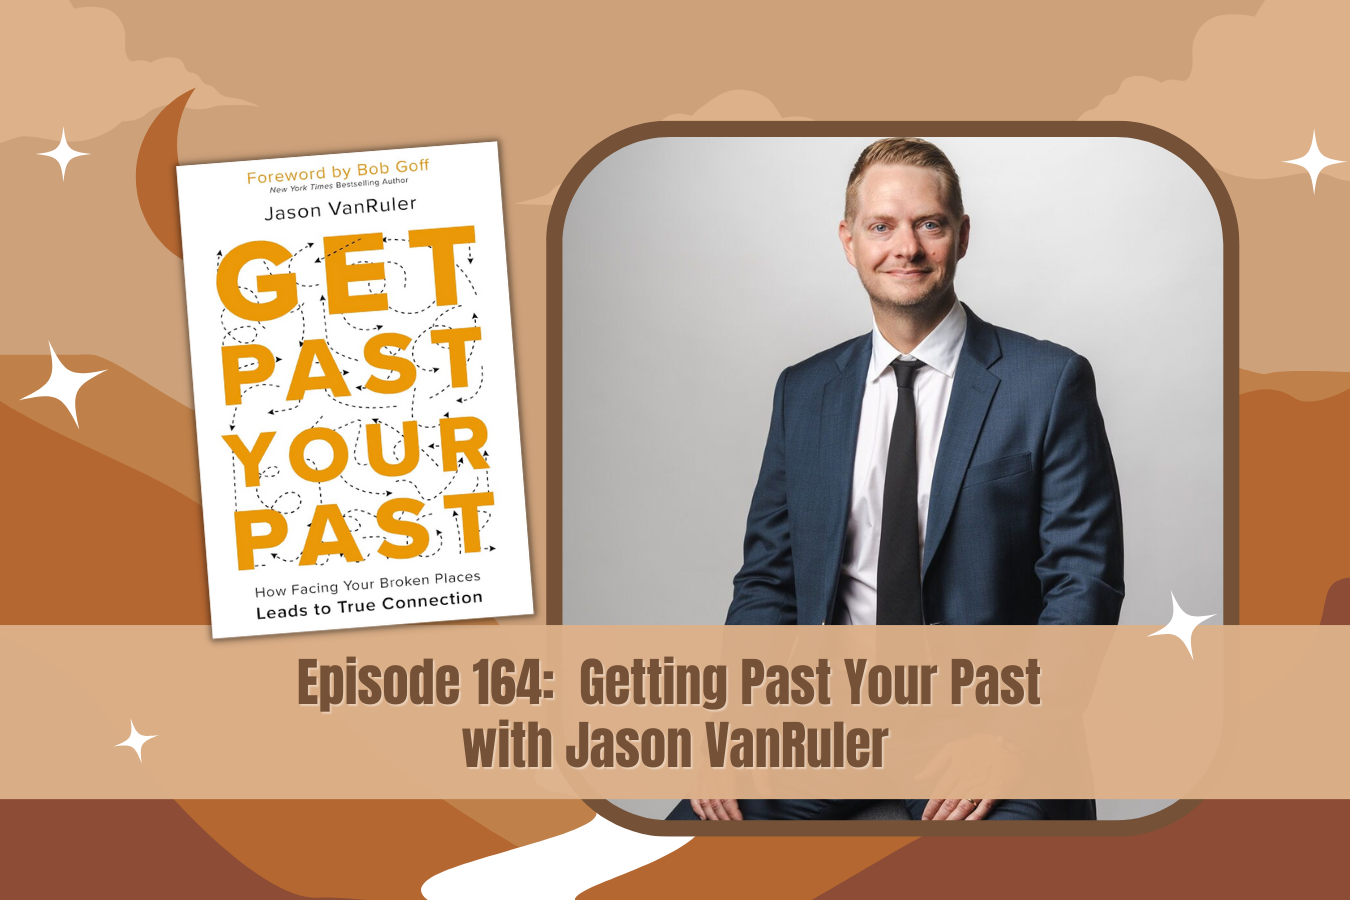 EH Podcast: Episode 164 Getting Past Your Past with Jason VanRuler